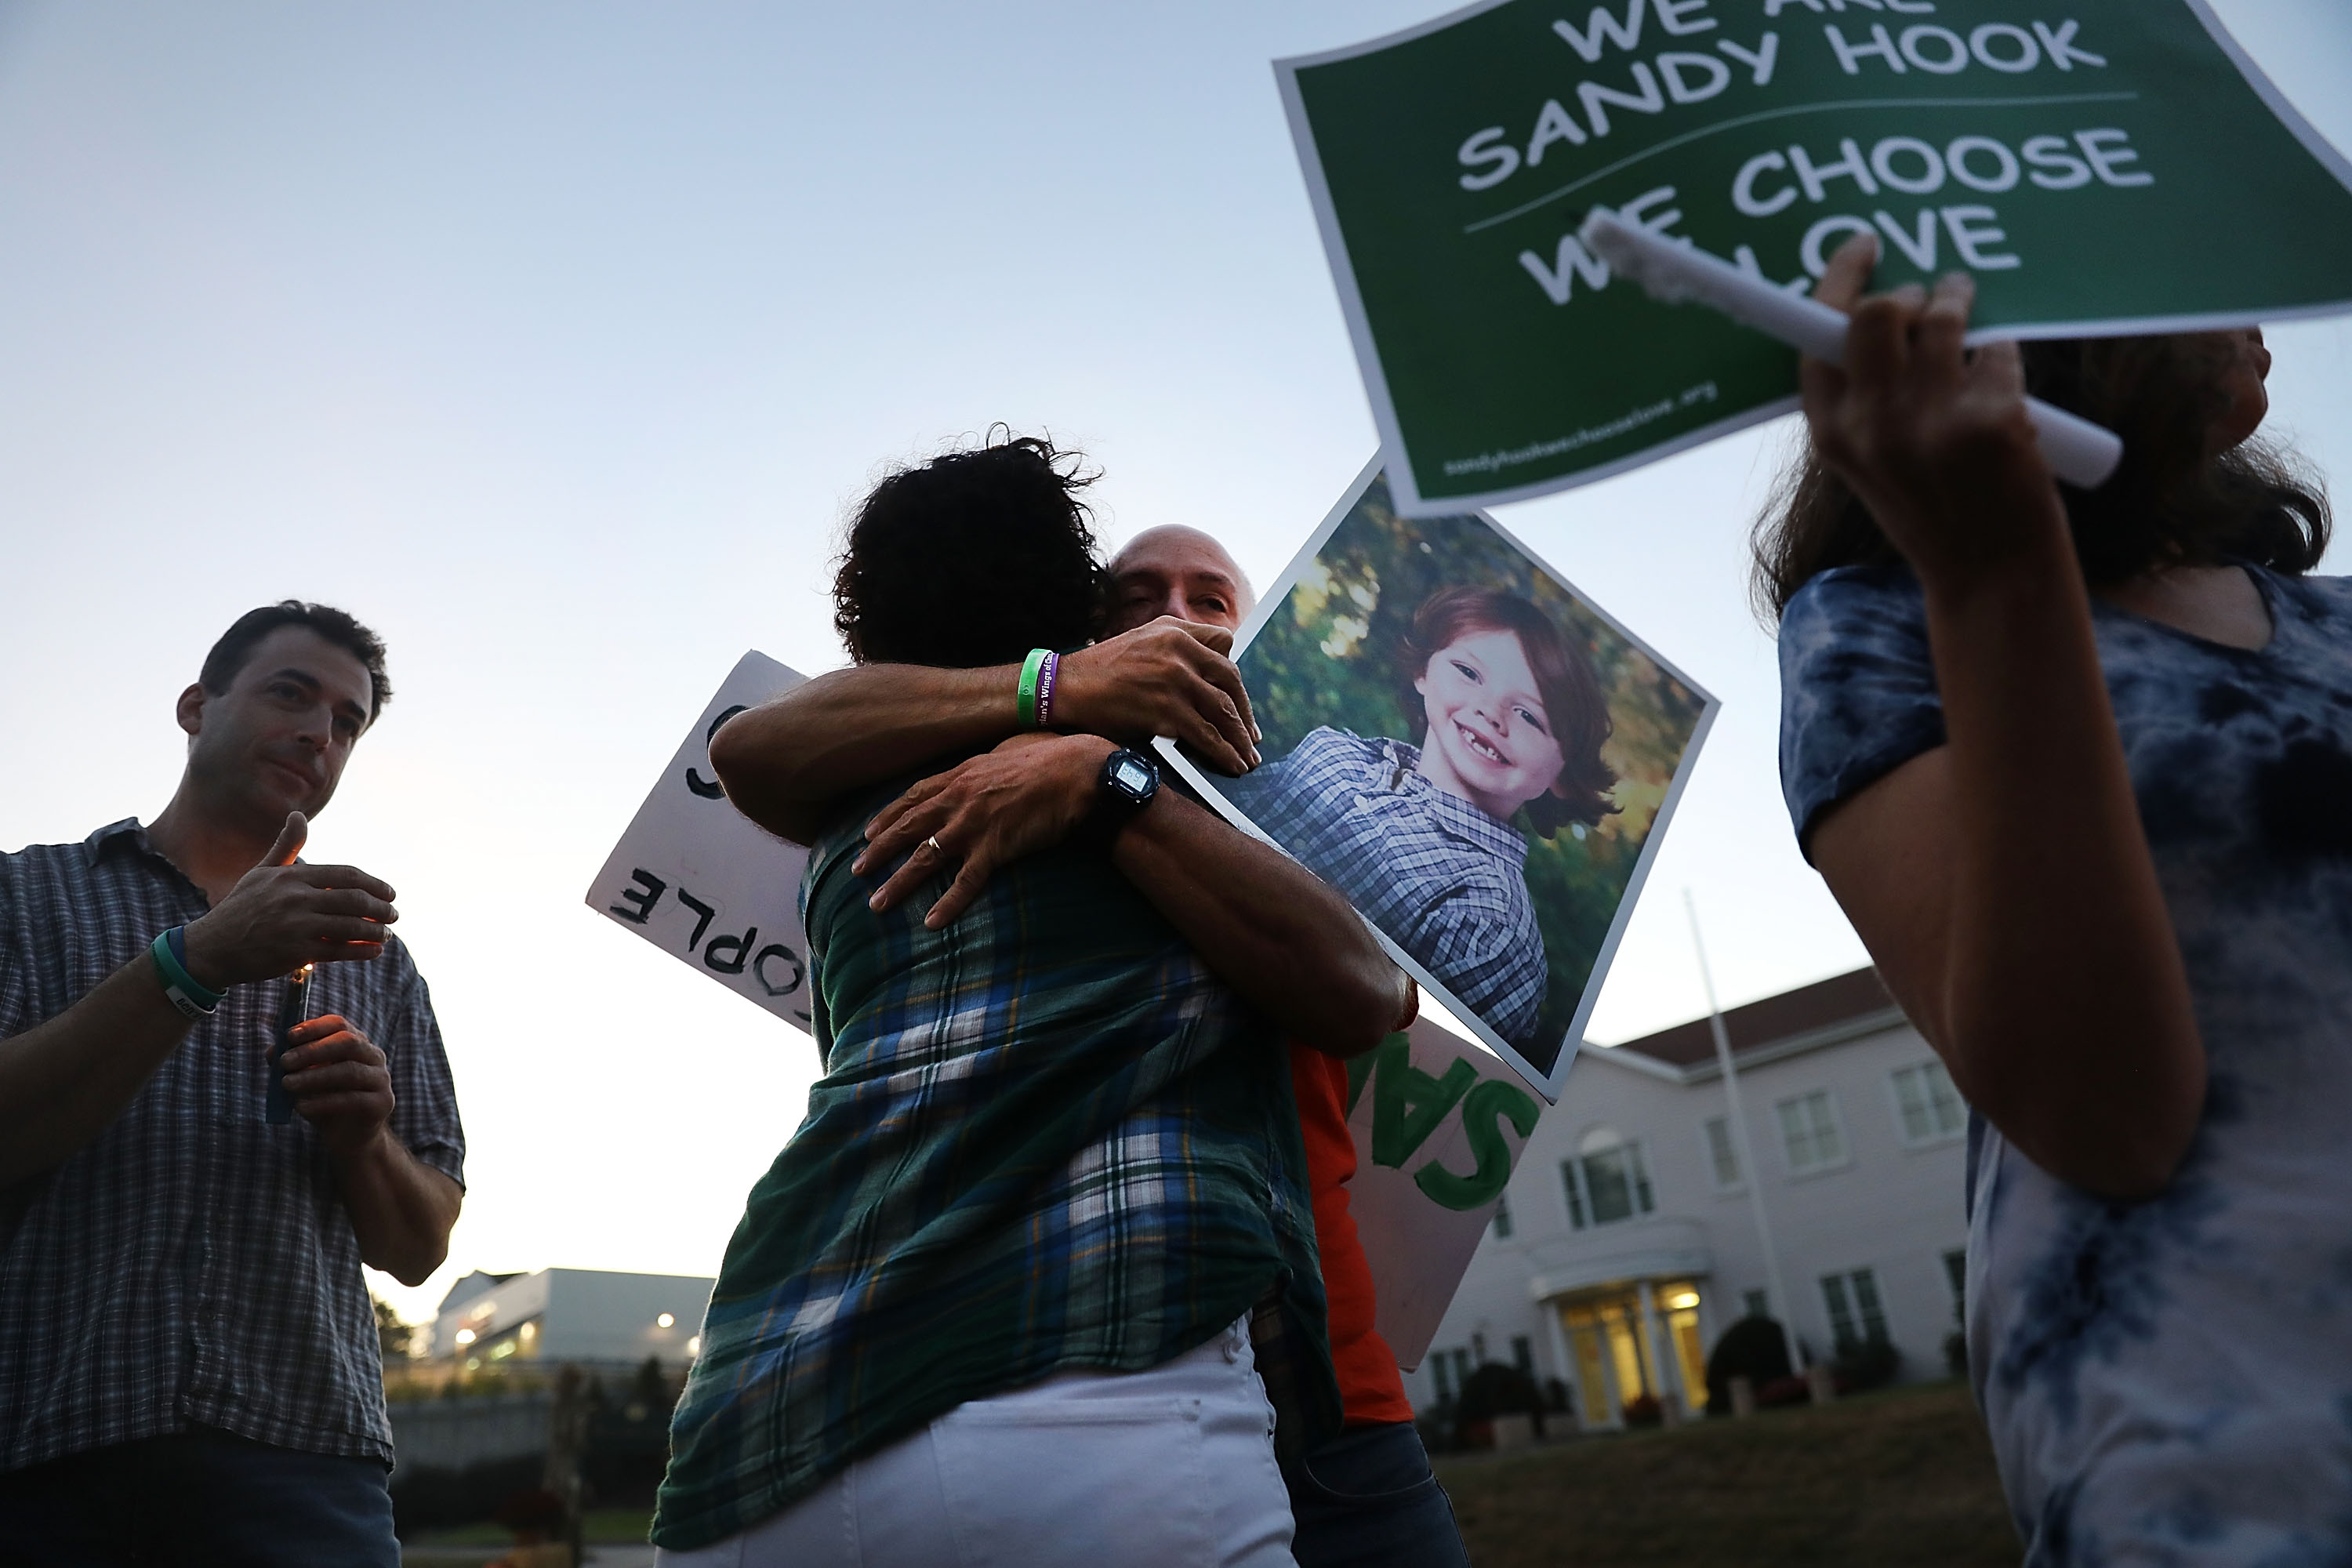 Mark Barden, whose son Daniel was killed in the Sandy Hook shooting, gets a hug on Oct. 4, 2017, in Newtown, Connecticut. (Spencer Platt—Getty Images)